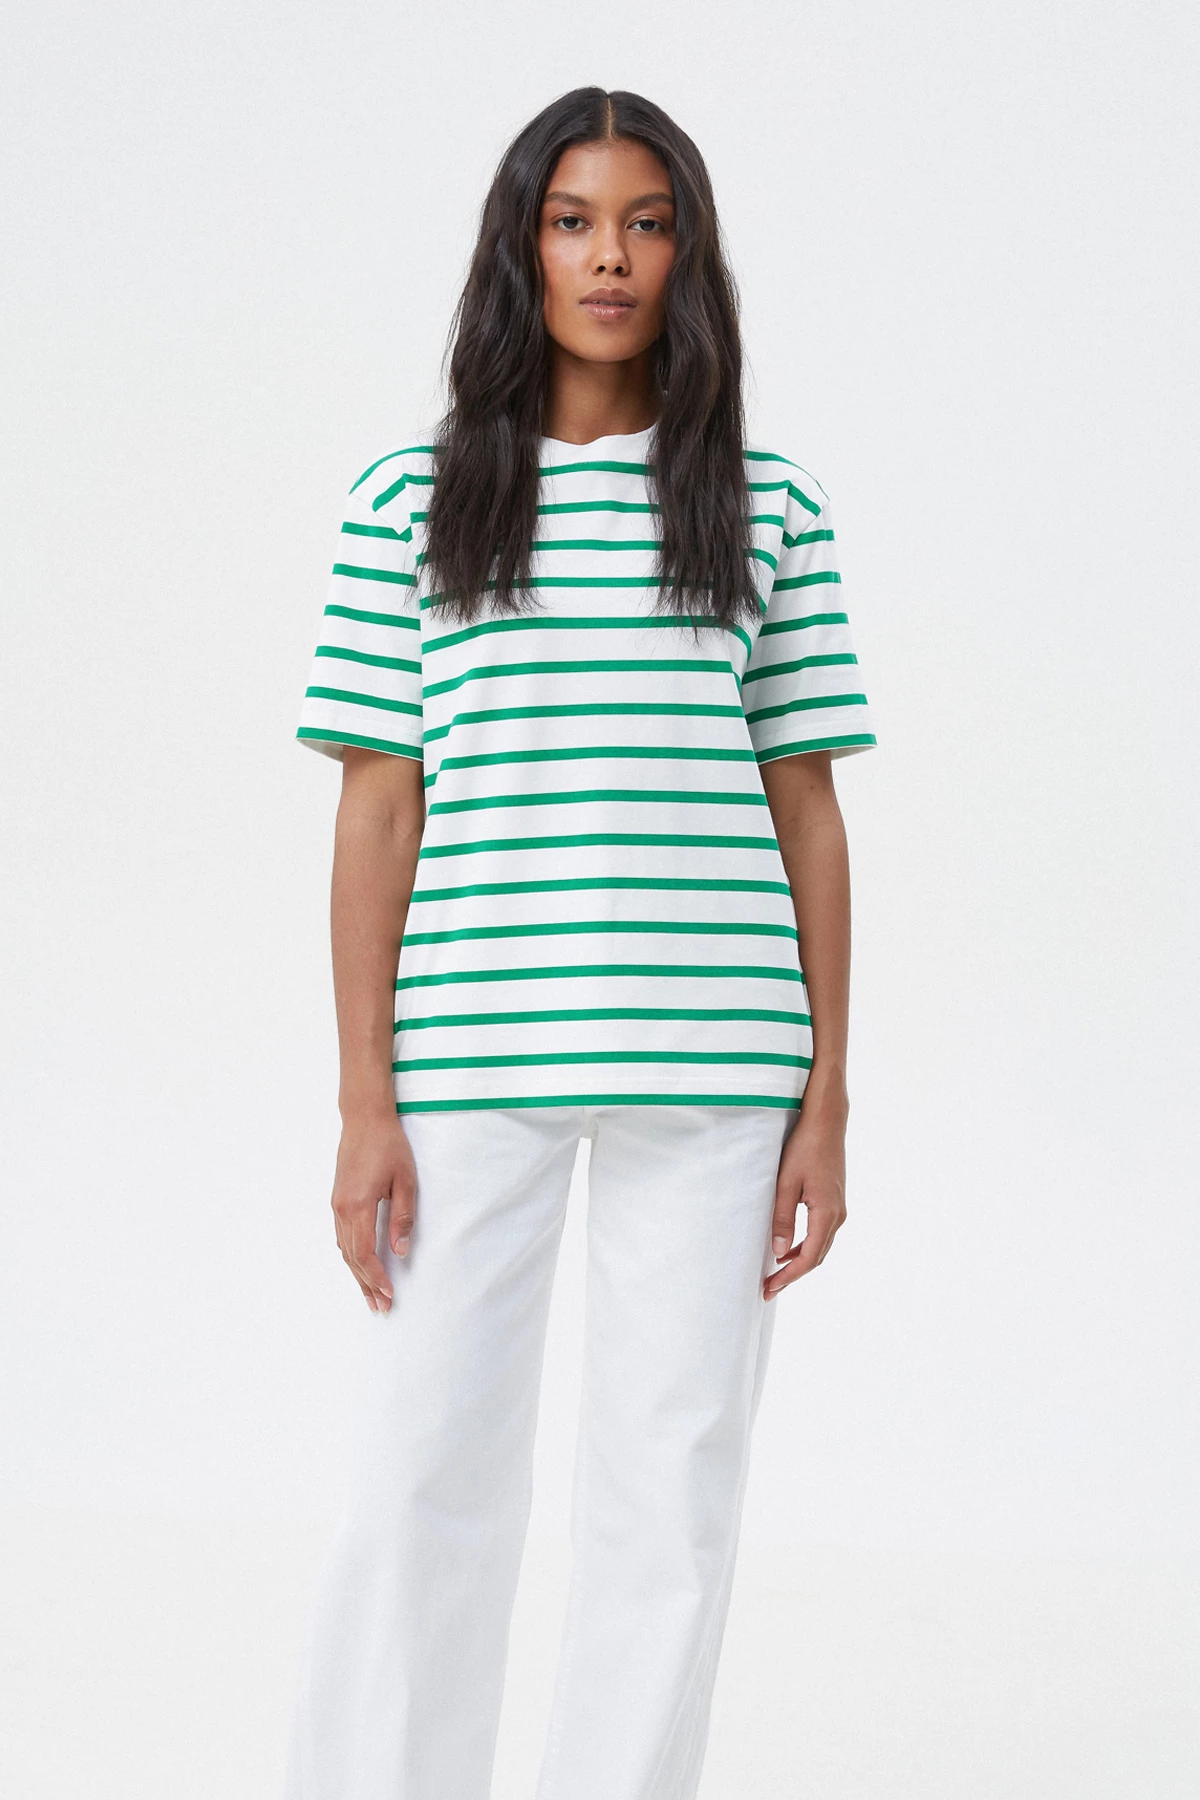 Cotton T-shirt with green stripes, photo 1